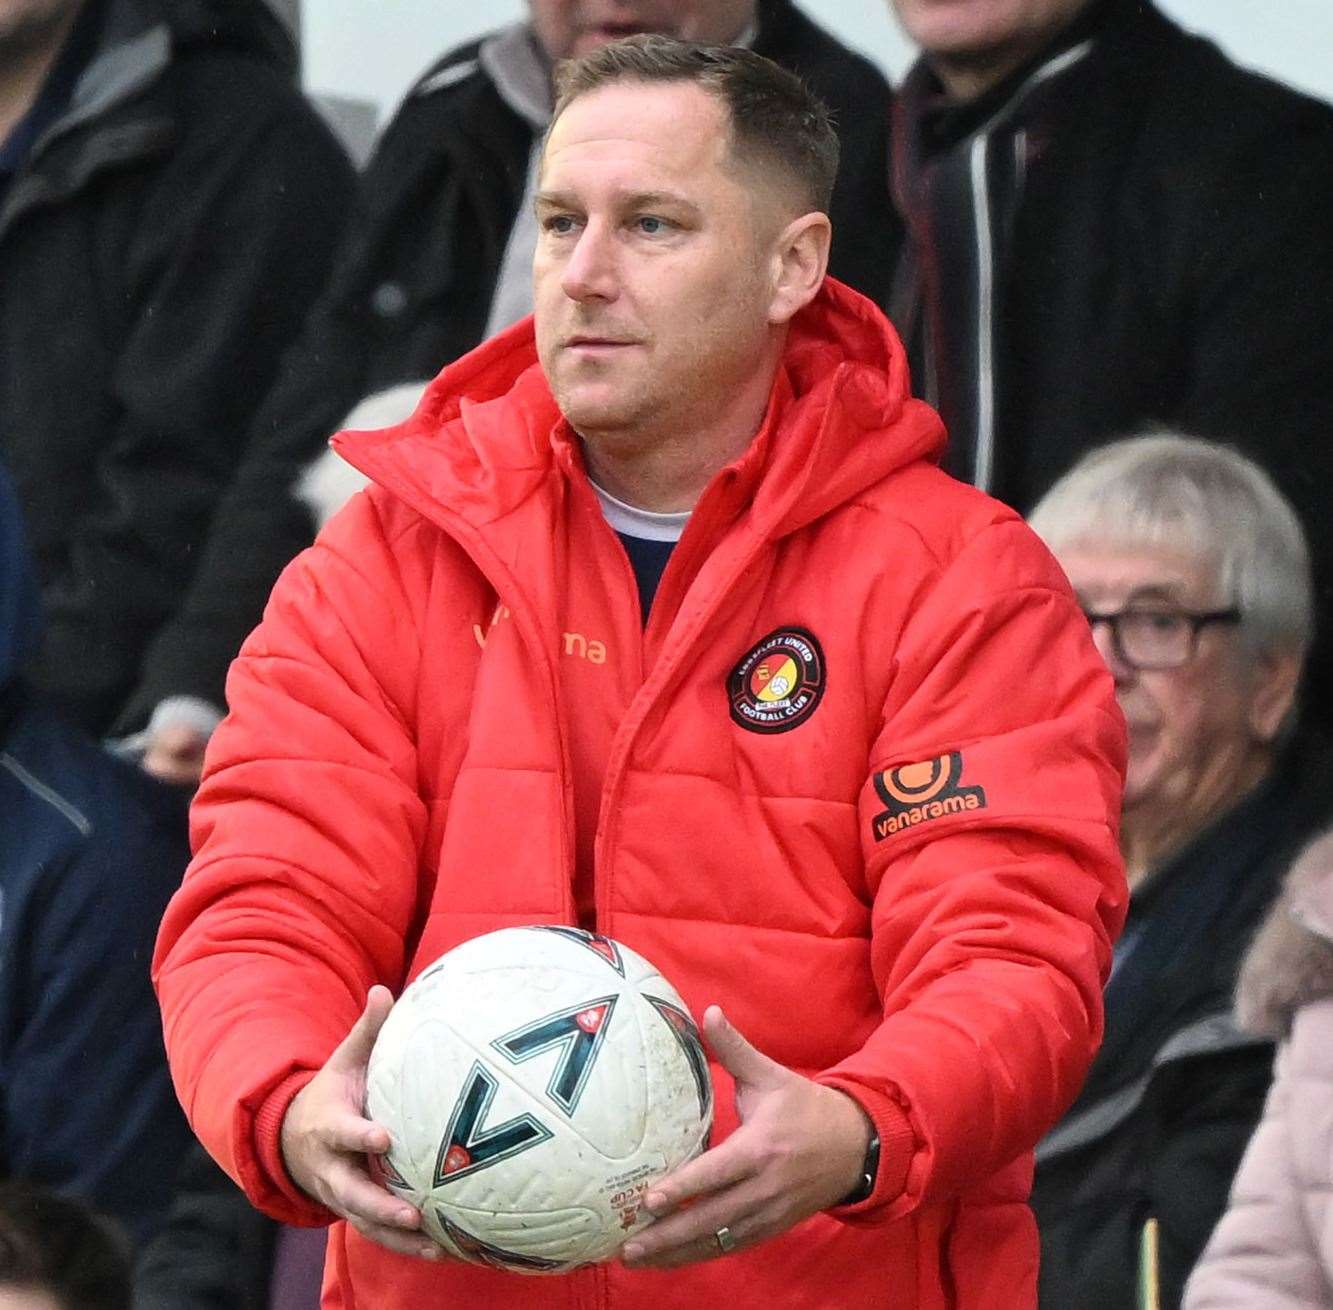 Ebbsfleet boss Dennis Kutrieb wants his players to keep their cool in the face of provocation. Picture: Keith Gillard